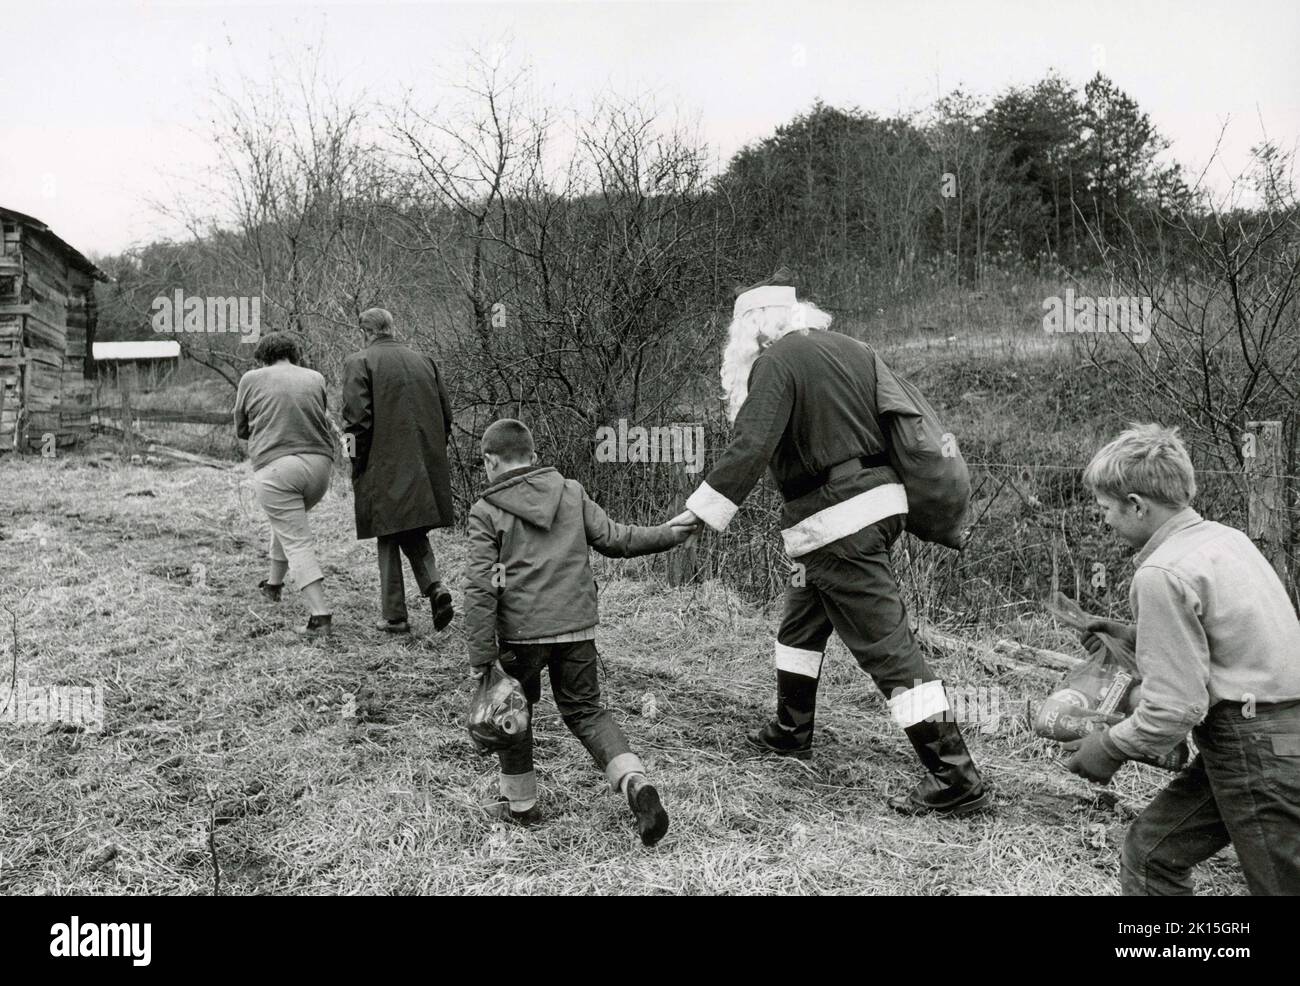 Santa Claus brings presents to children in Appalachia, thanks to the Parson of the Hills; 1965. The charity was set up to provide gifts to the children of the Appalachias. Stock Photo